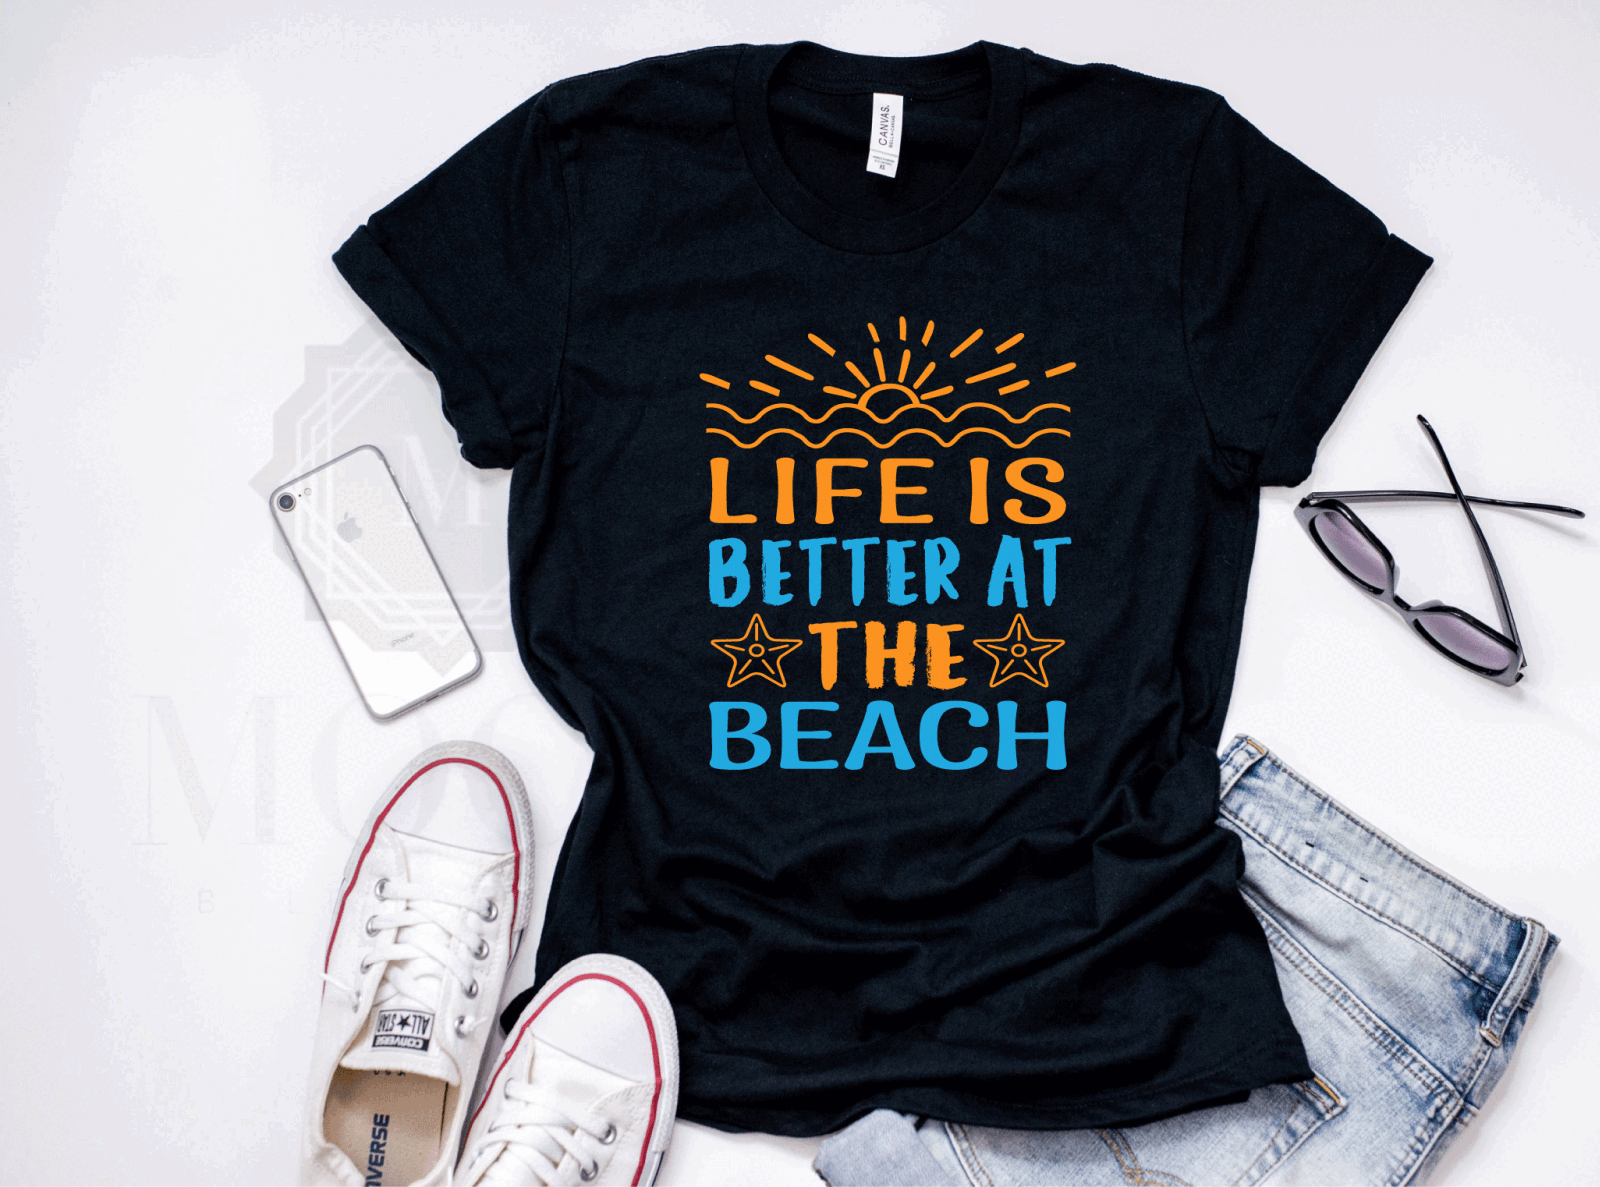 summer beach typography t-shirt design by Nurearth on Dribbble